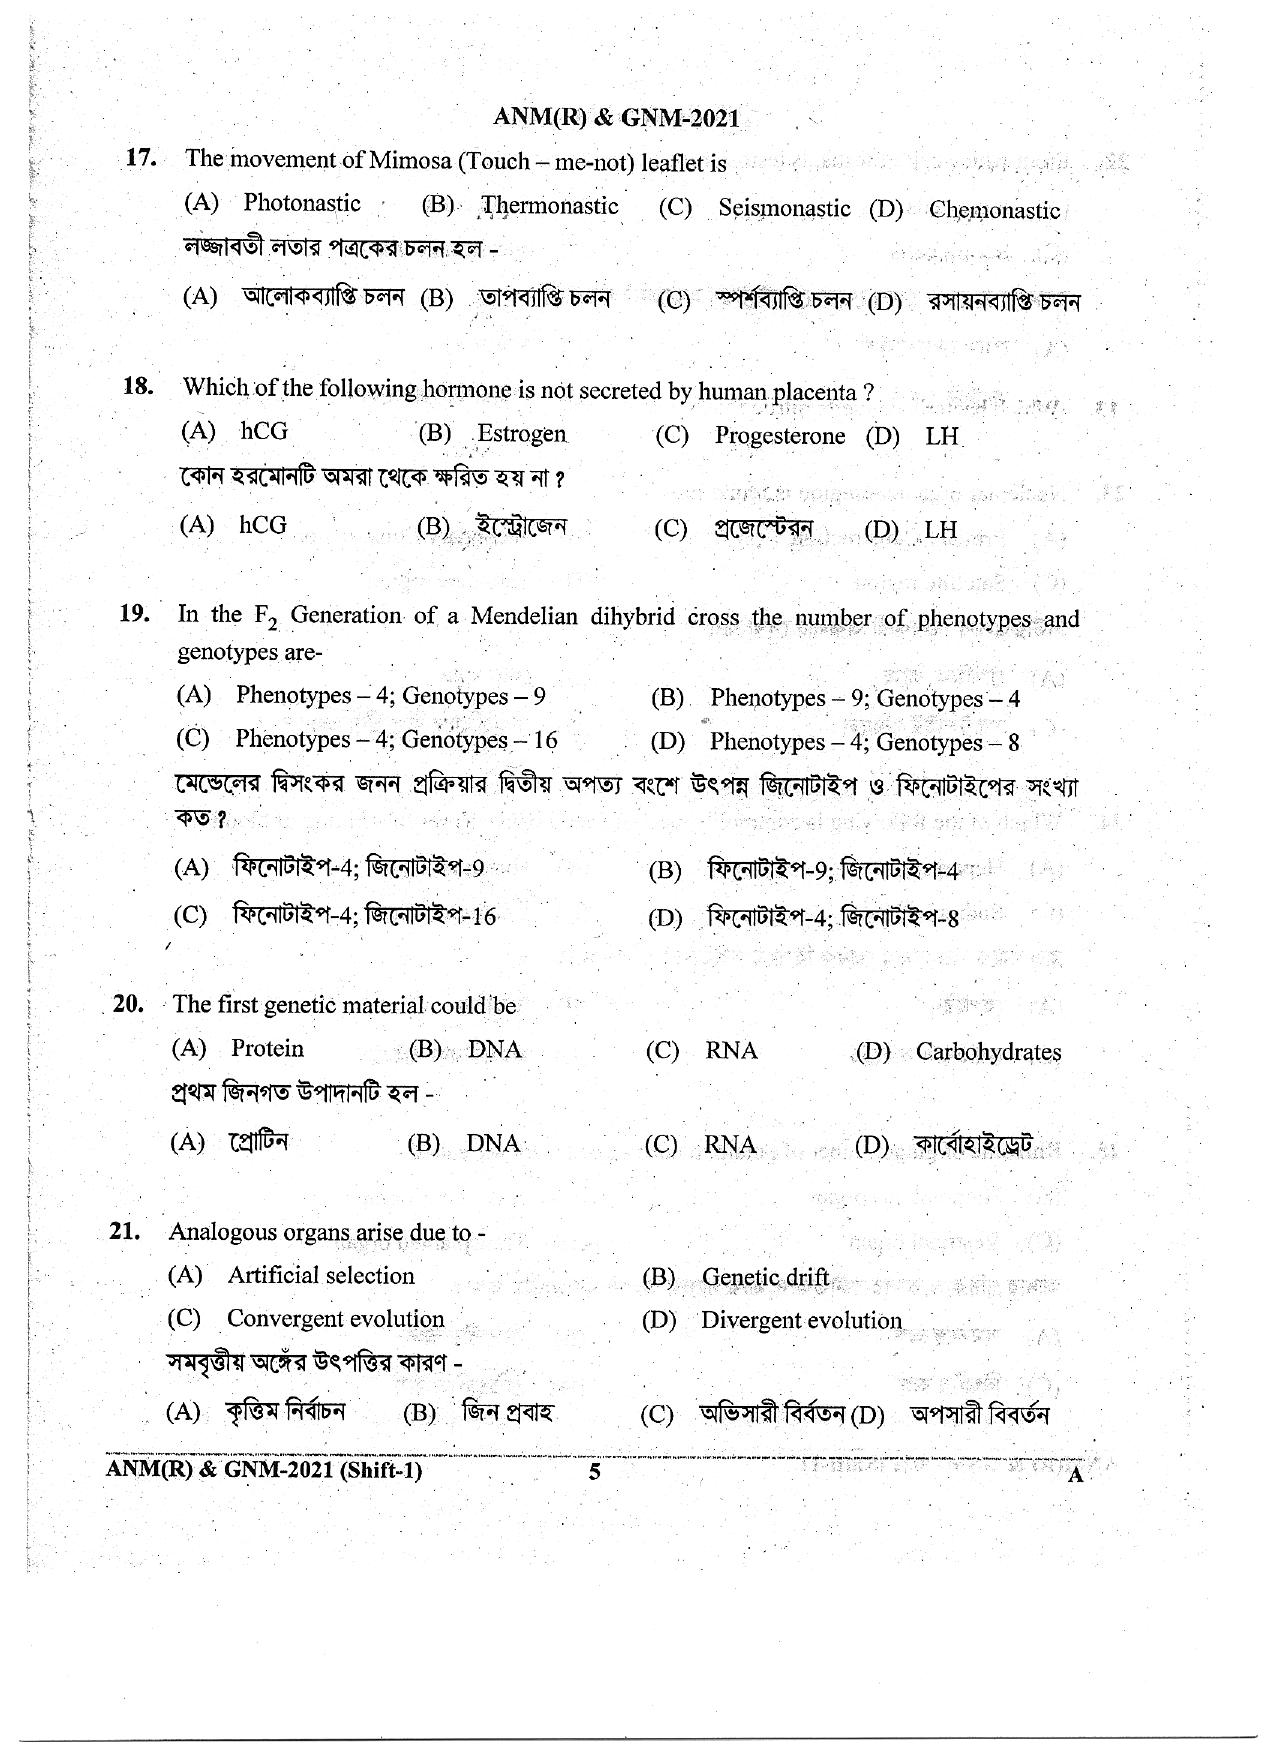 WB ANM GNM 2021 Session I Question Paper - Page 5